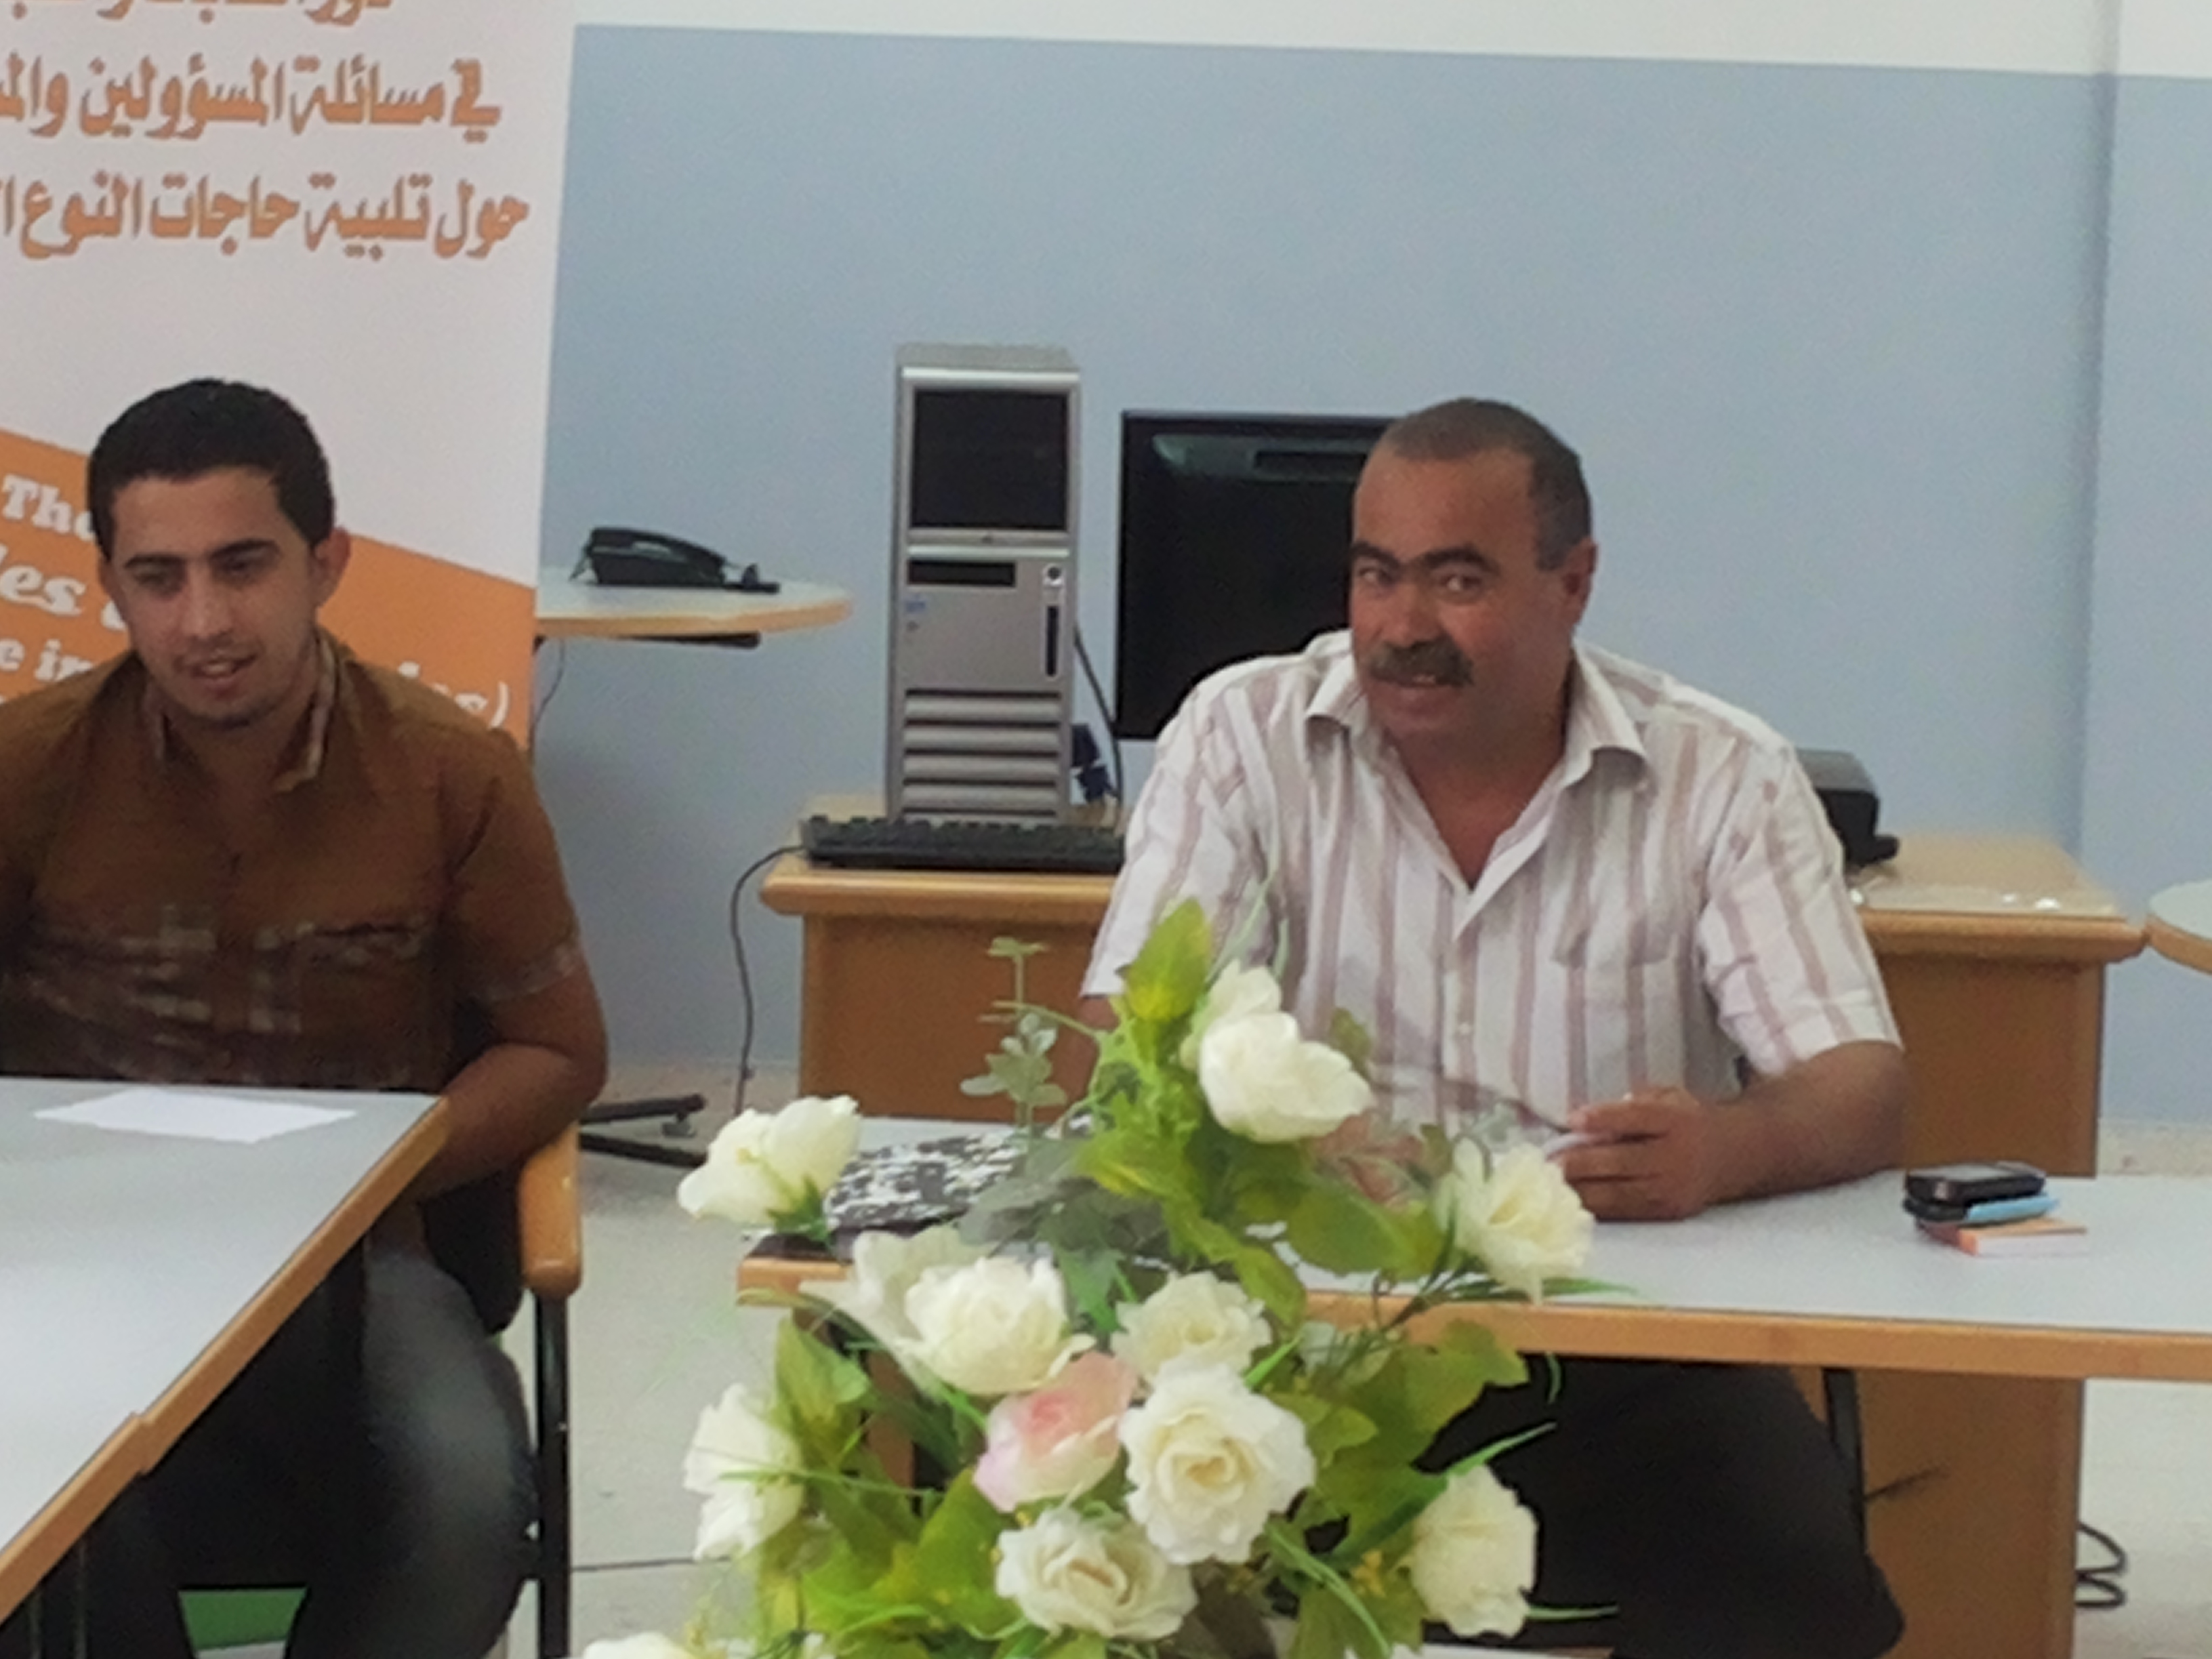  Roles for Social Change Association-ADWAR implemented a dialogue meeting with Officials from Ministry of Public Works